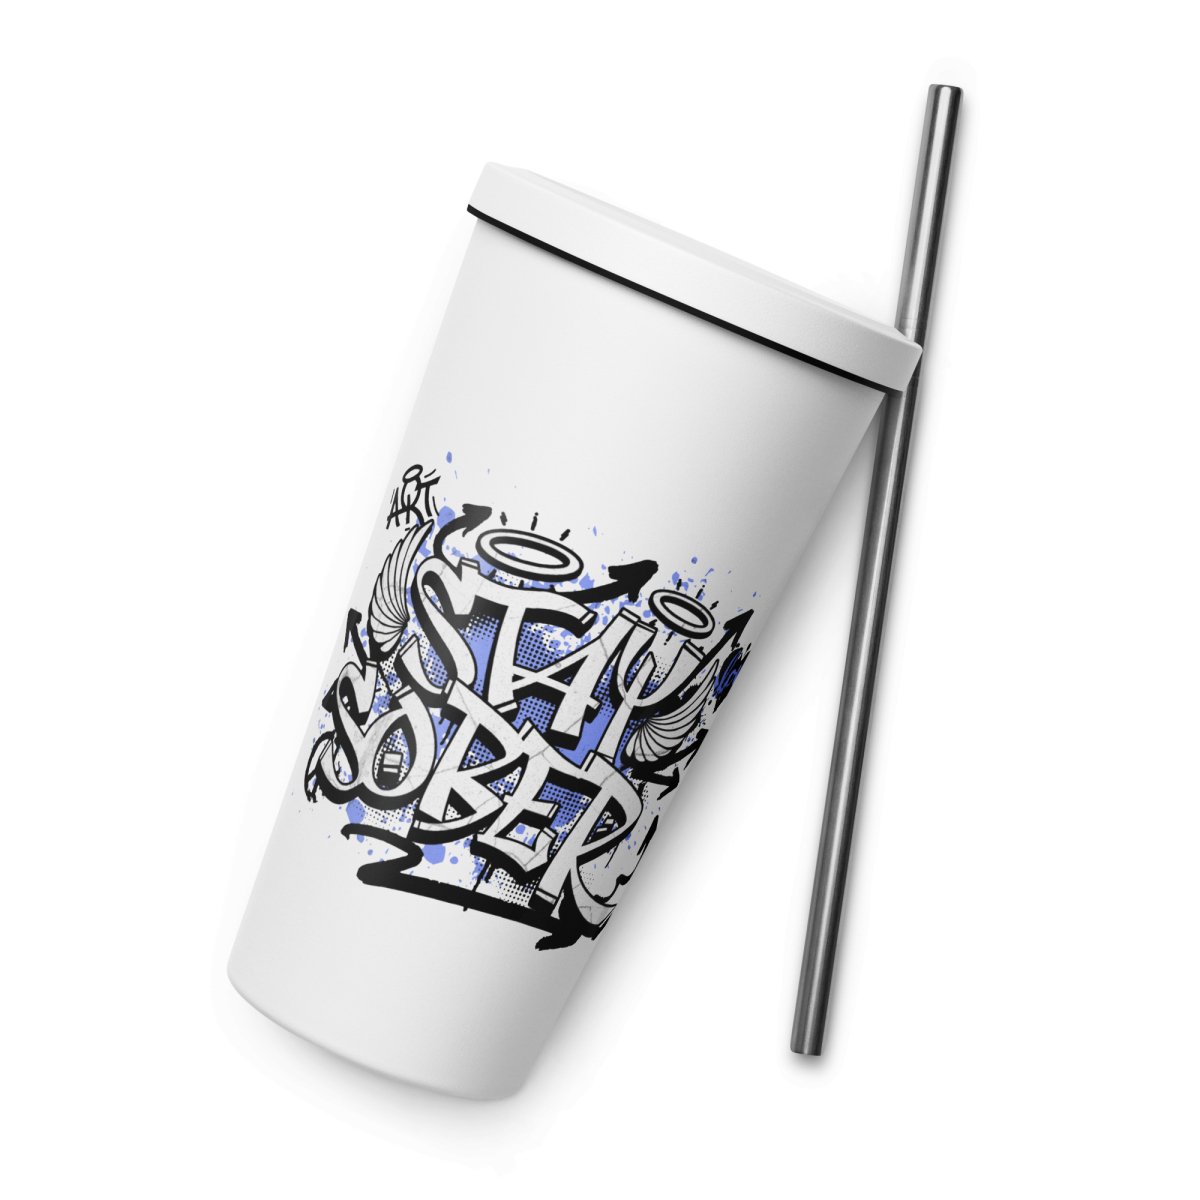 Stay Sober Commitment Insulated Tumbler - Sobervation